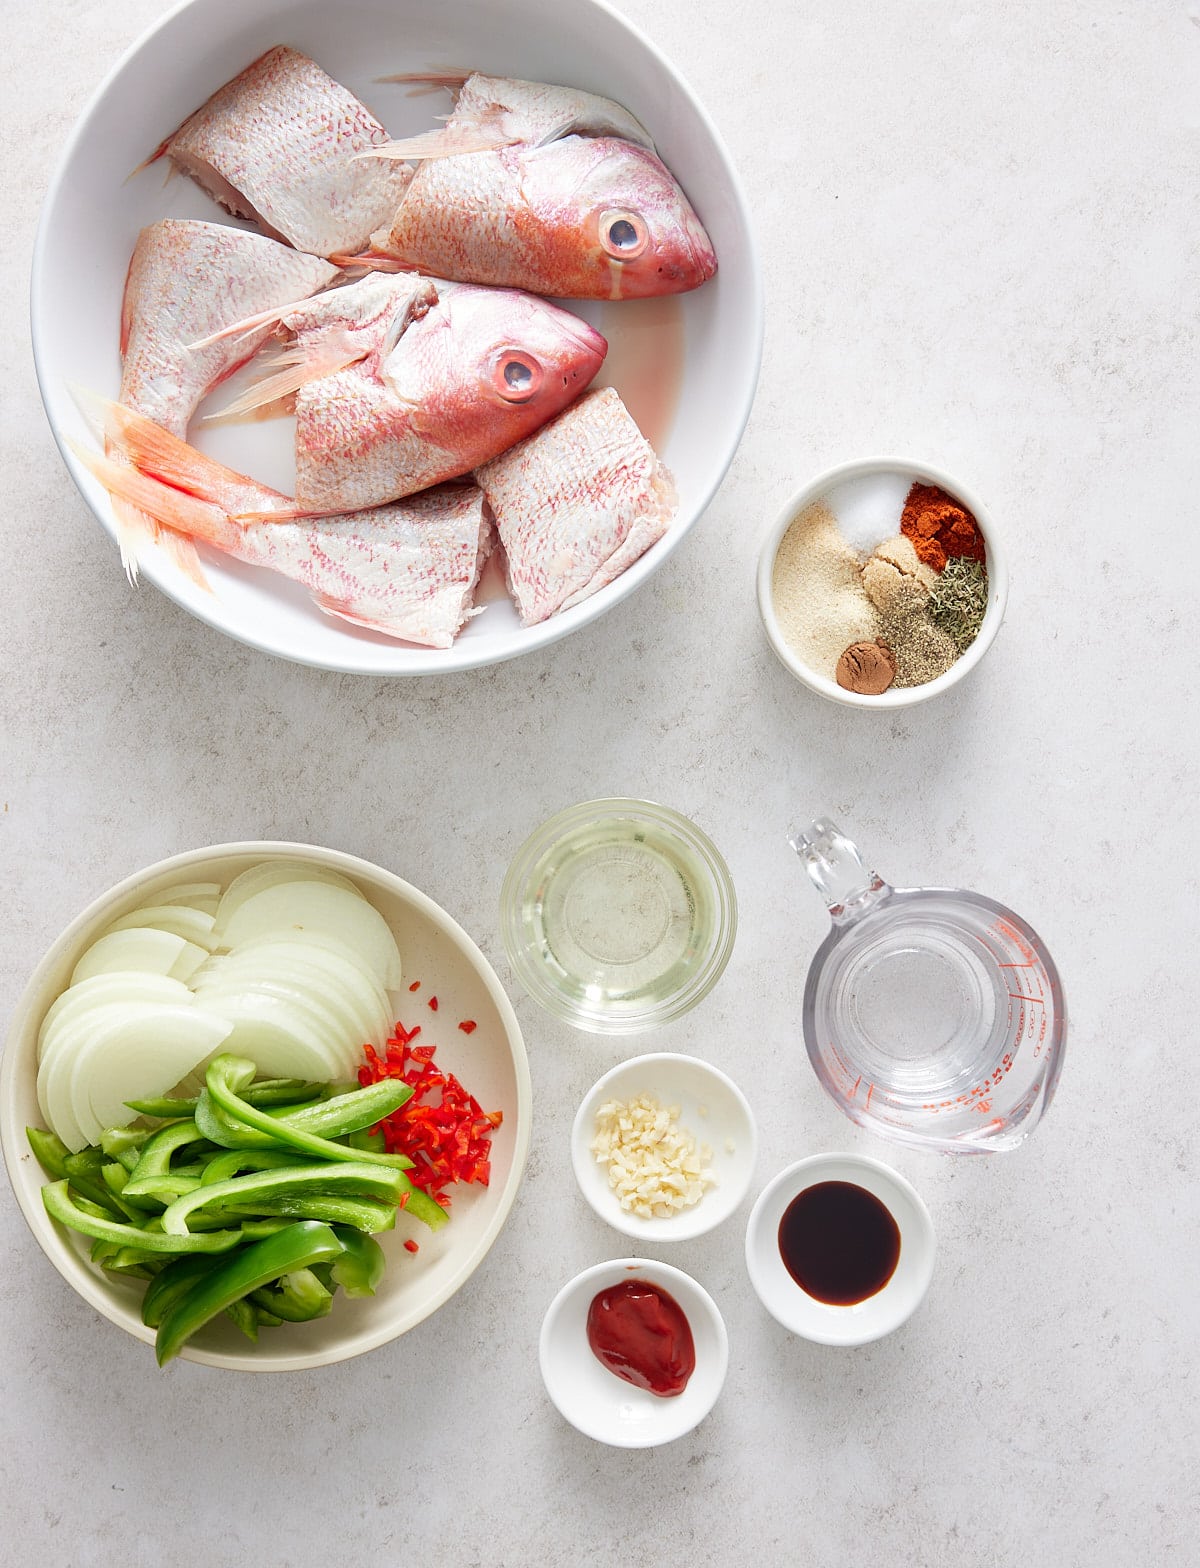 Brown stew fish recipe ingredients set out in white bowls